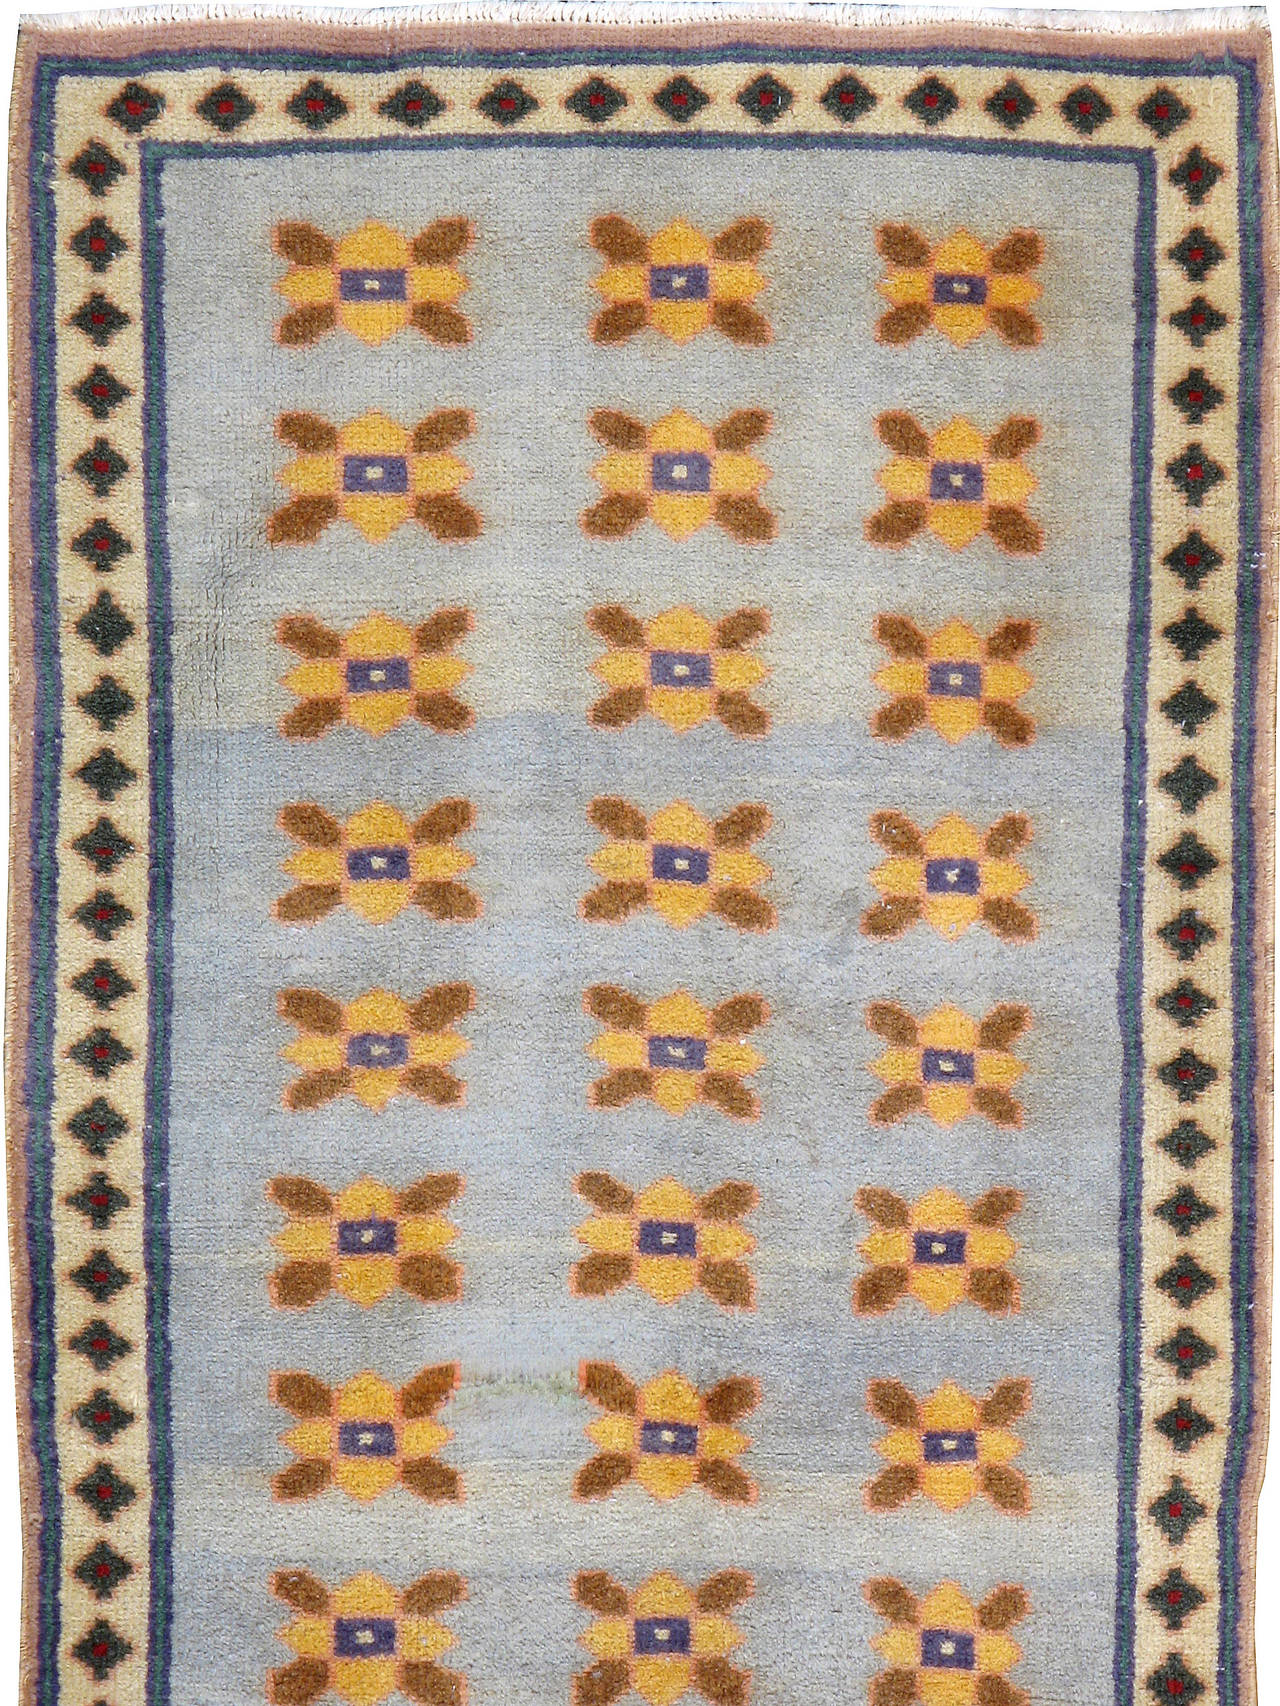 A vintage Persian Kashan carpet from the second quarter of the 20th century.